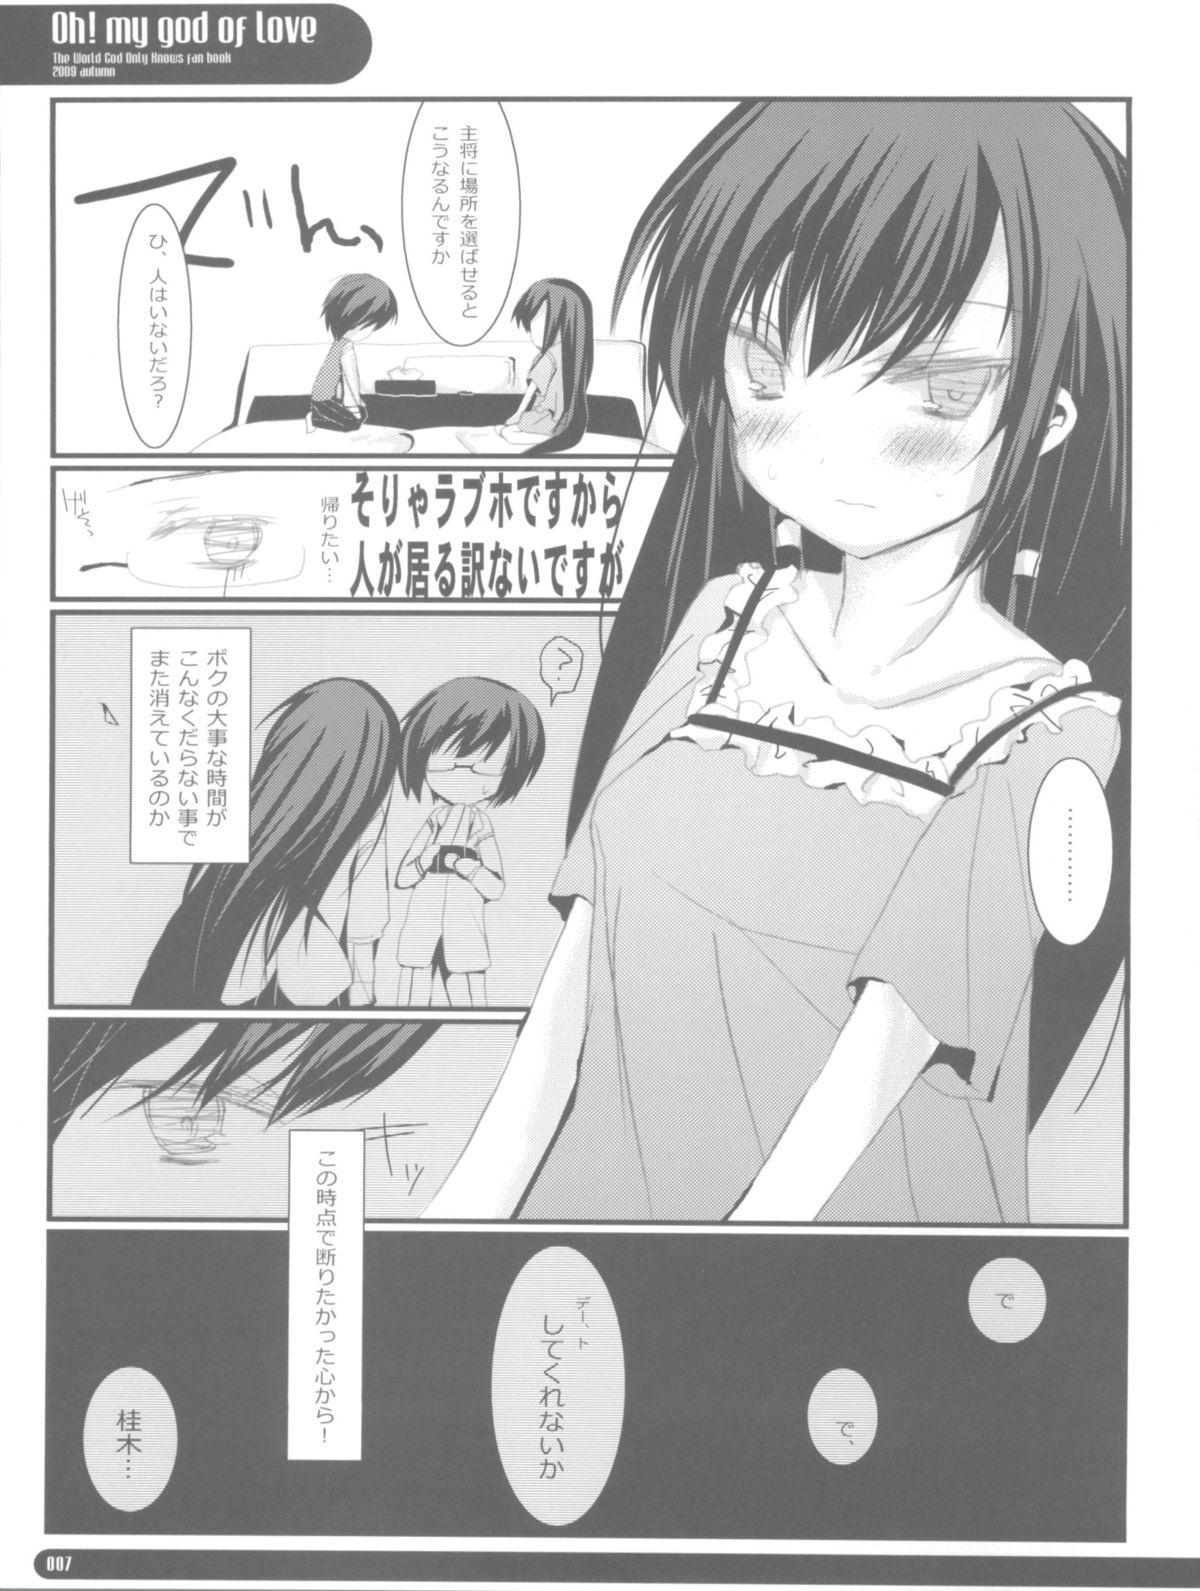 Cumshots OH!MY GOD OF LOVE - The world god only knows Masturbando - Page 7